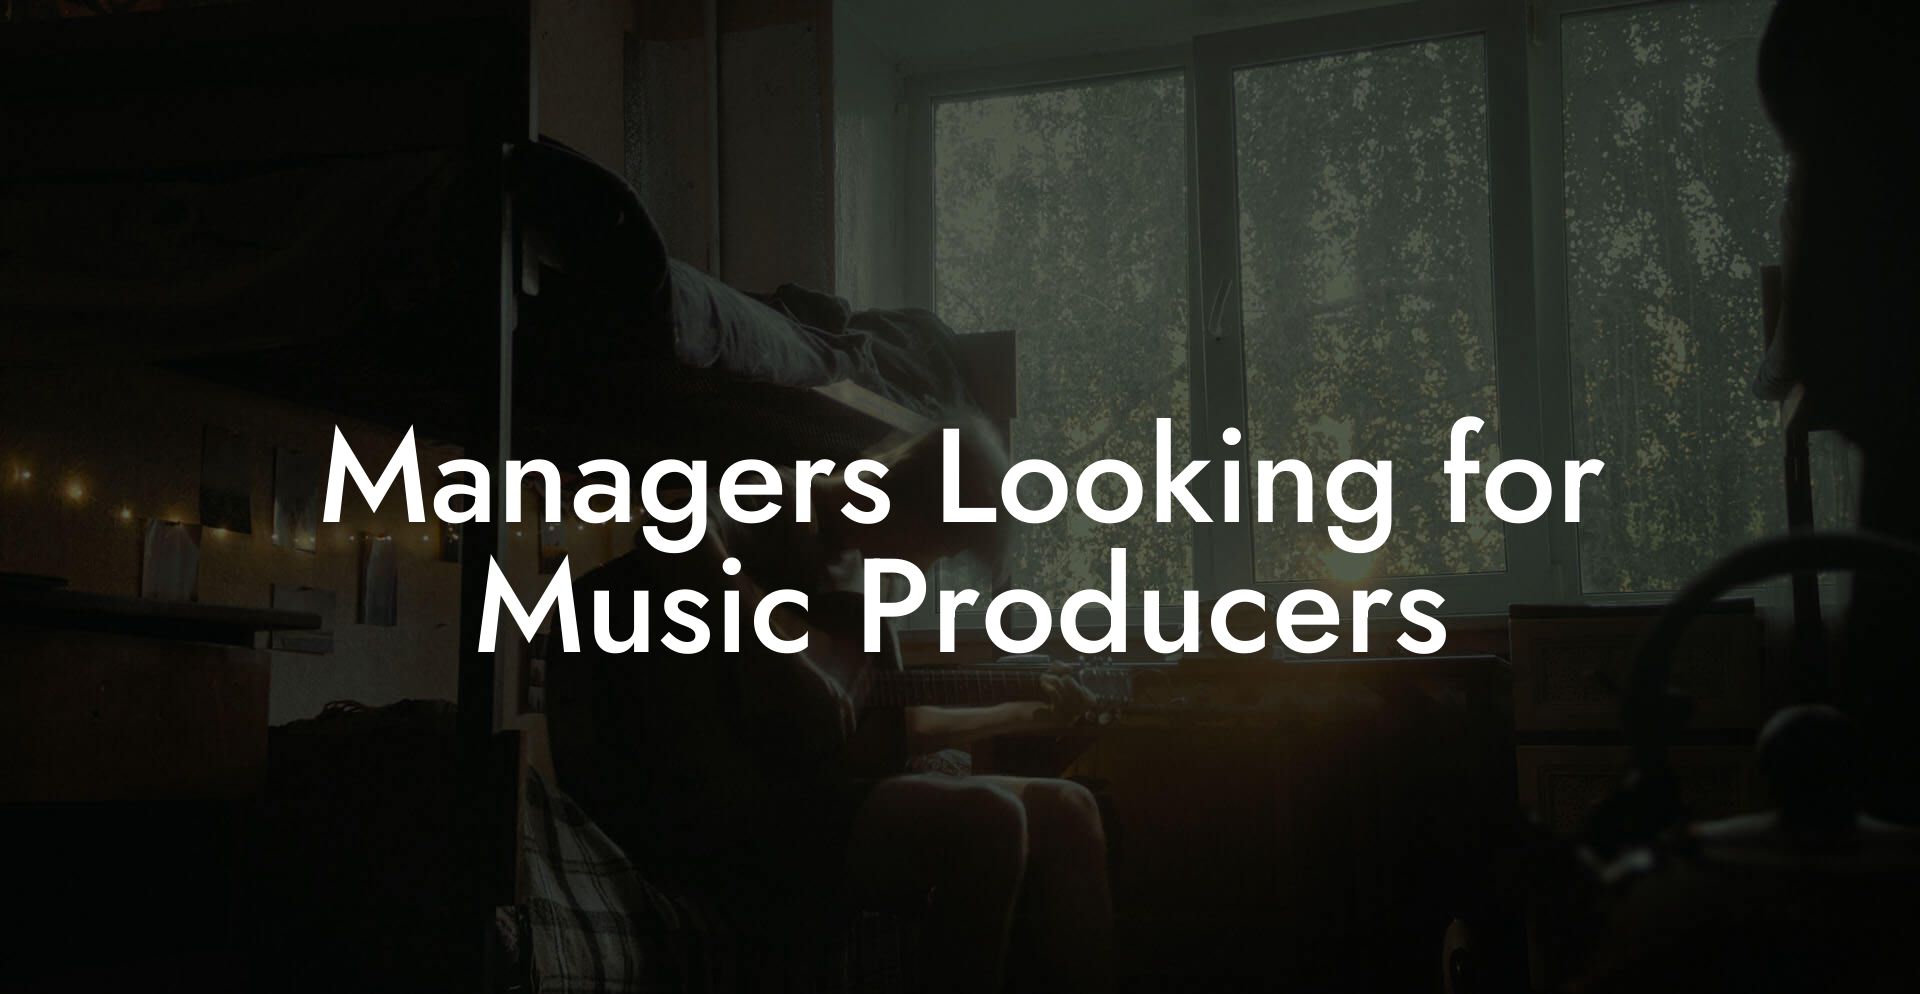 Managers Looking for Music Producers